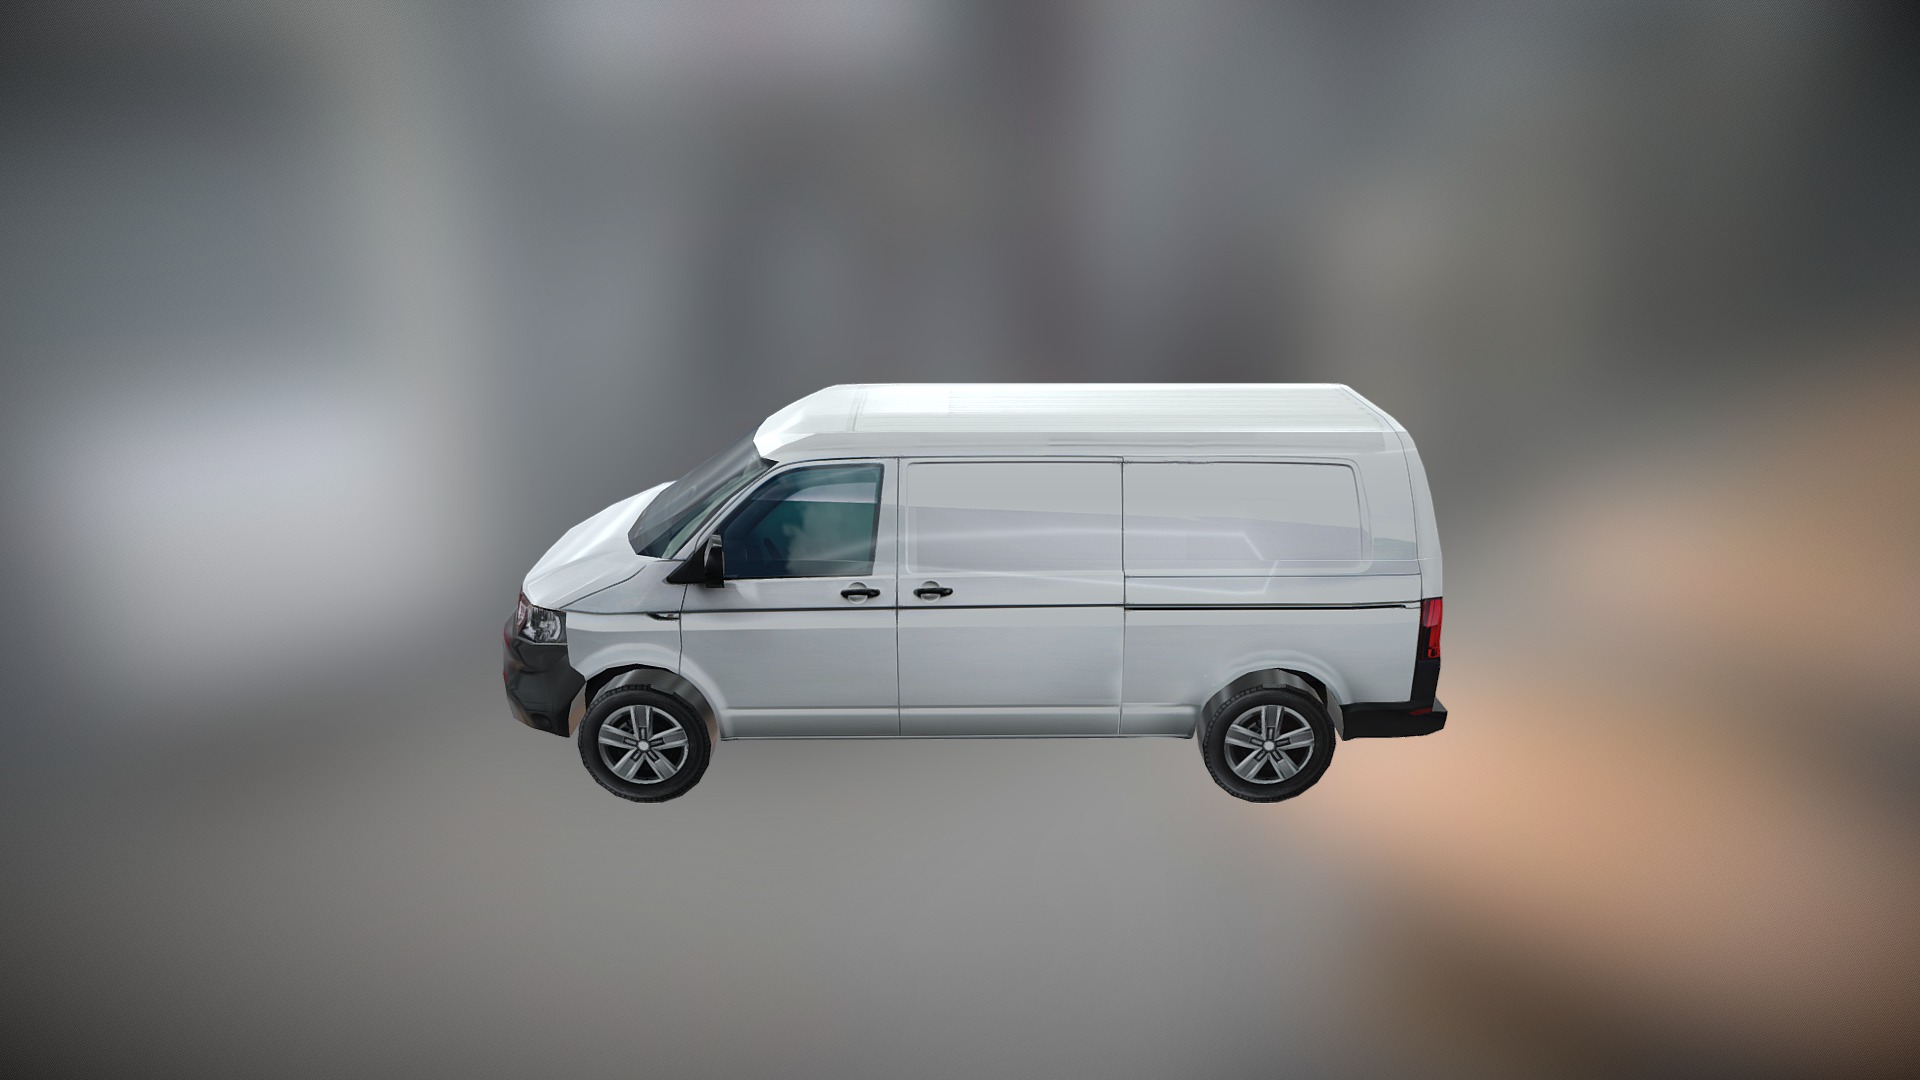 3D model European Van transporter - This is a 3D model of the European Van transporter. The 3D model is about a small white car.